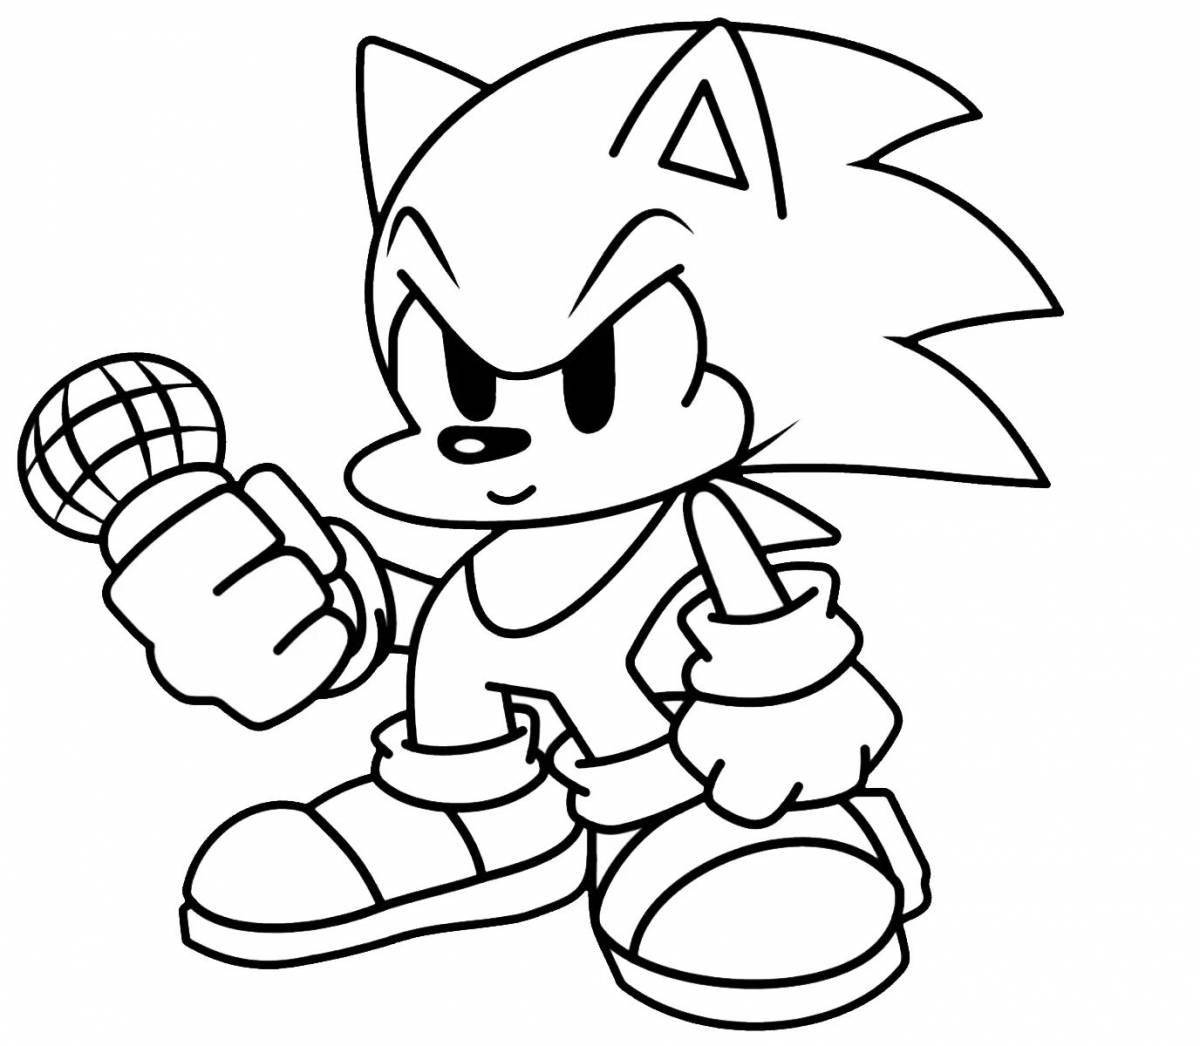 Amazing sonic exe coloring book